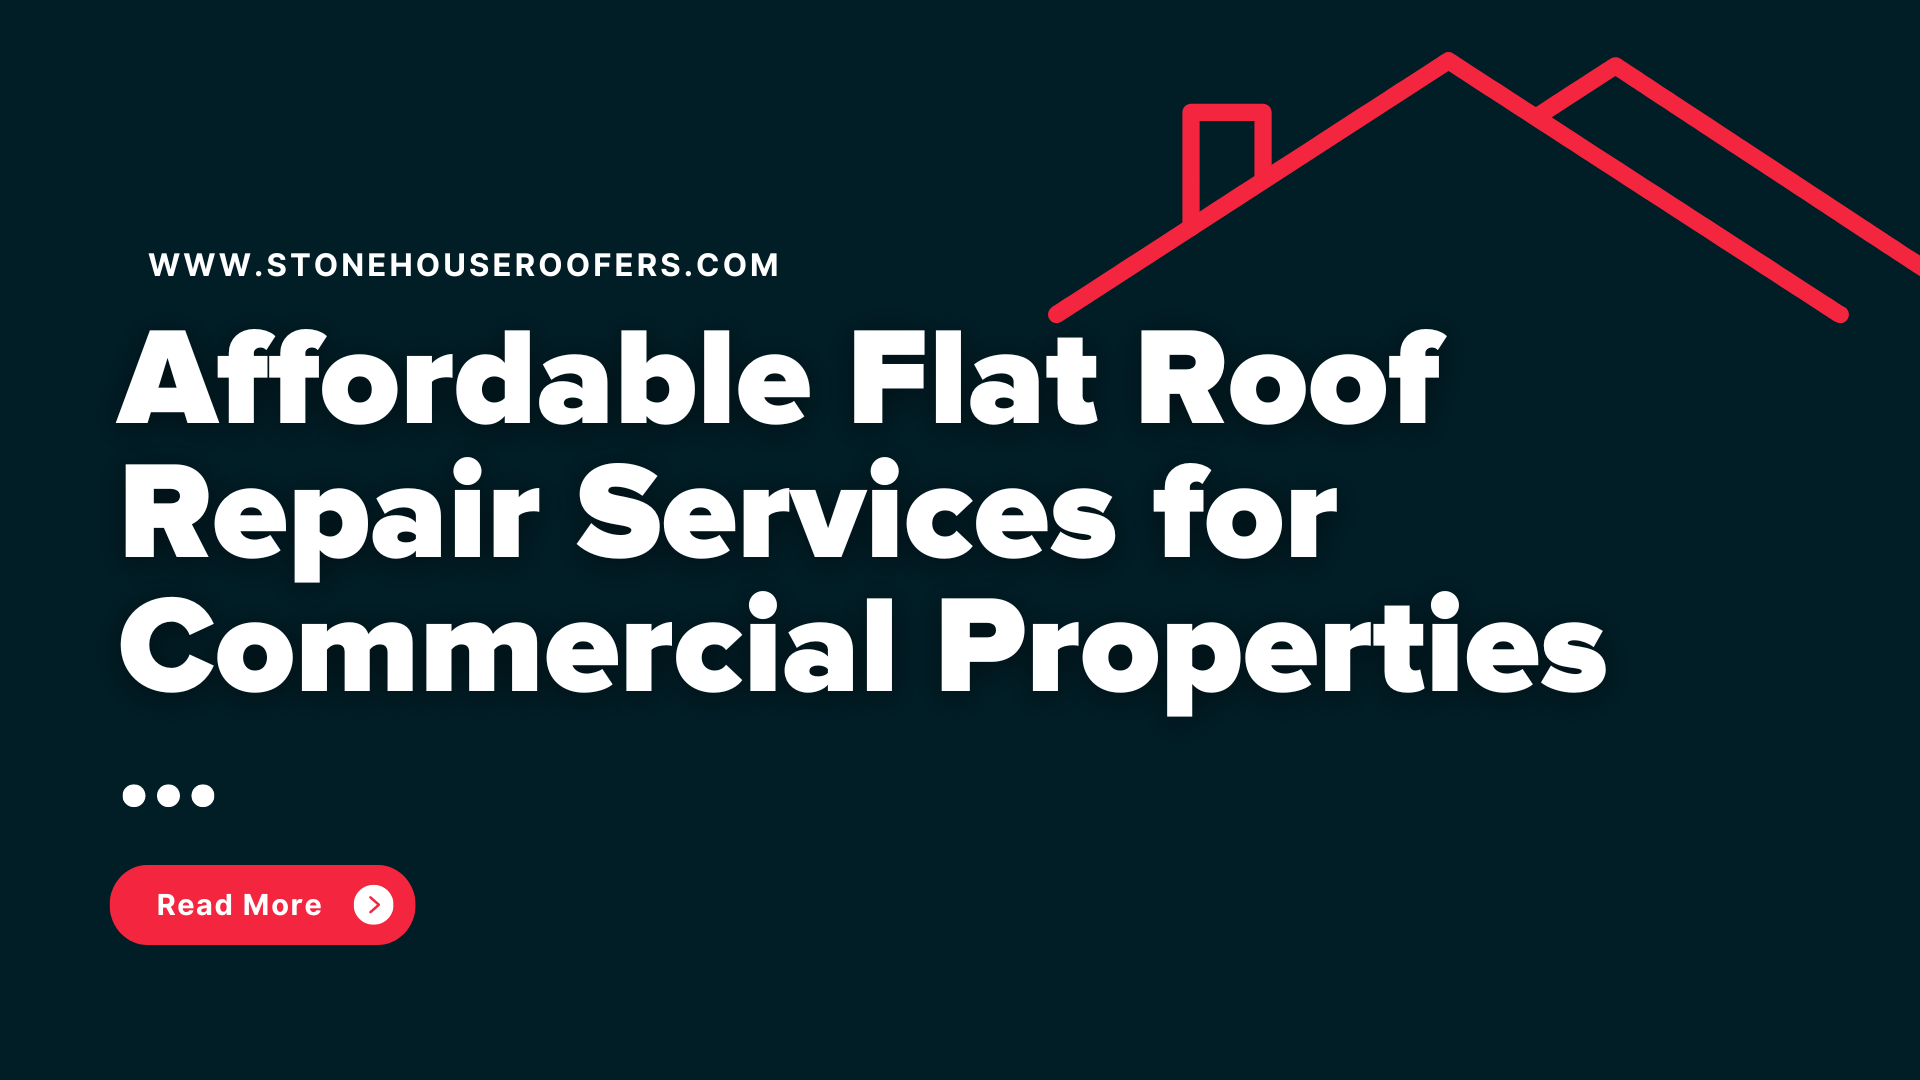 Affordable Flat Roof Repair Services for Commercial Properties